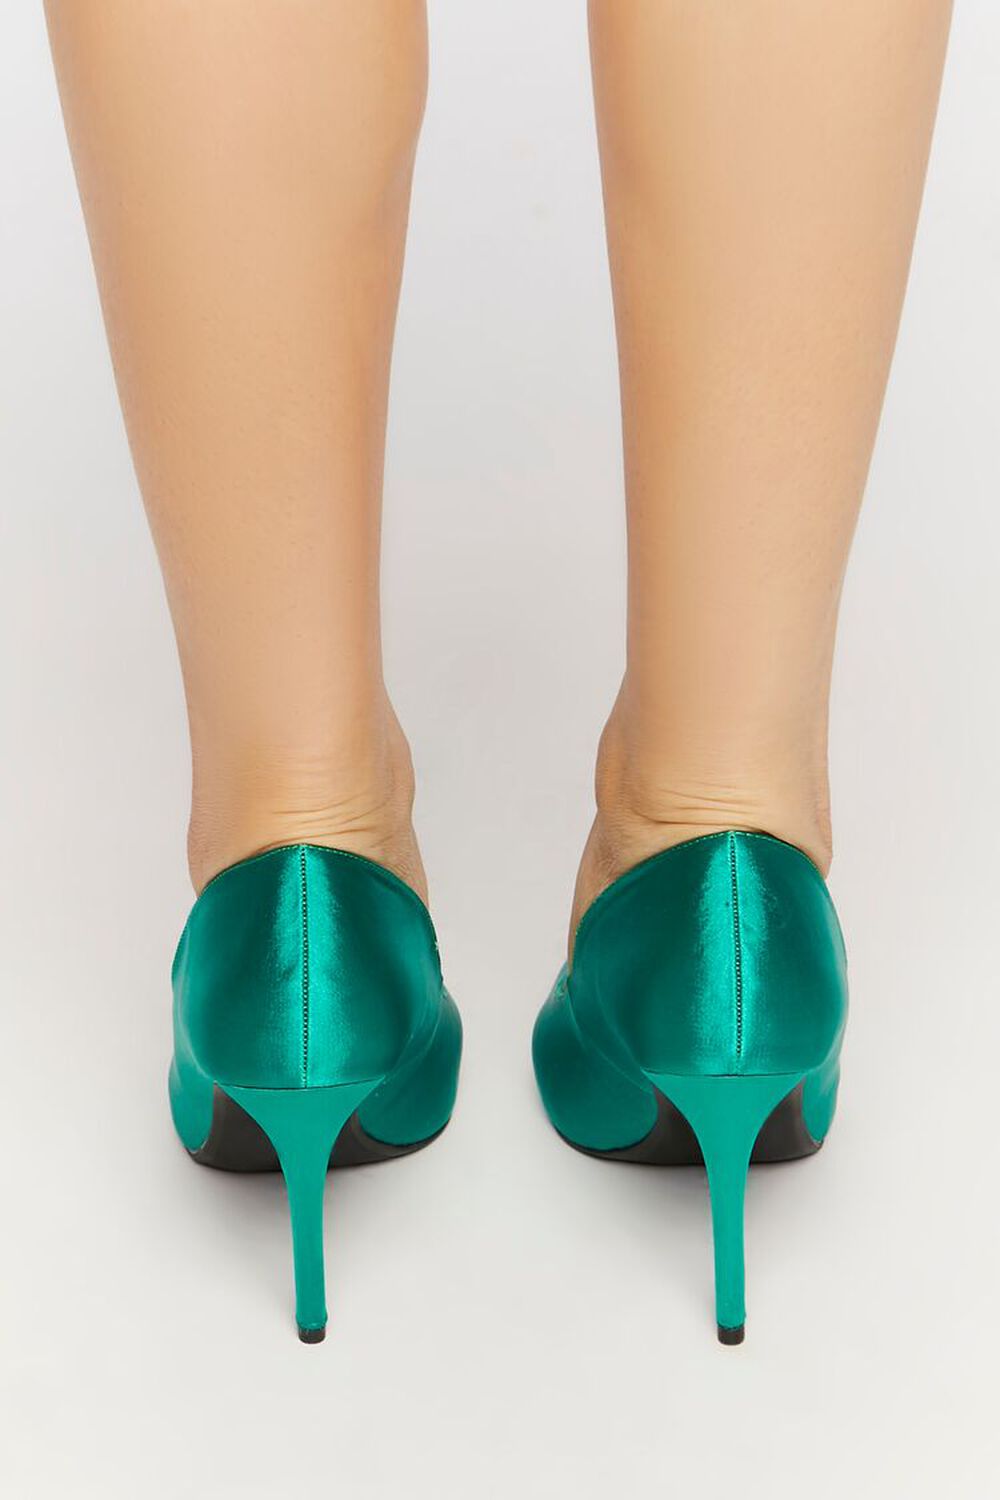 GREEN Satin Pointed Toe Pumps, image 3